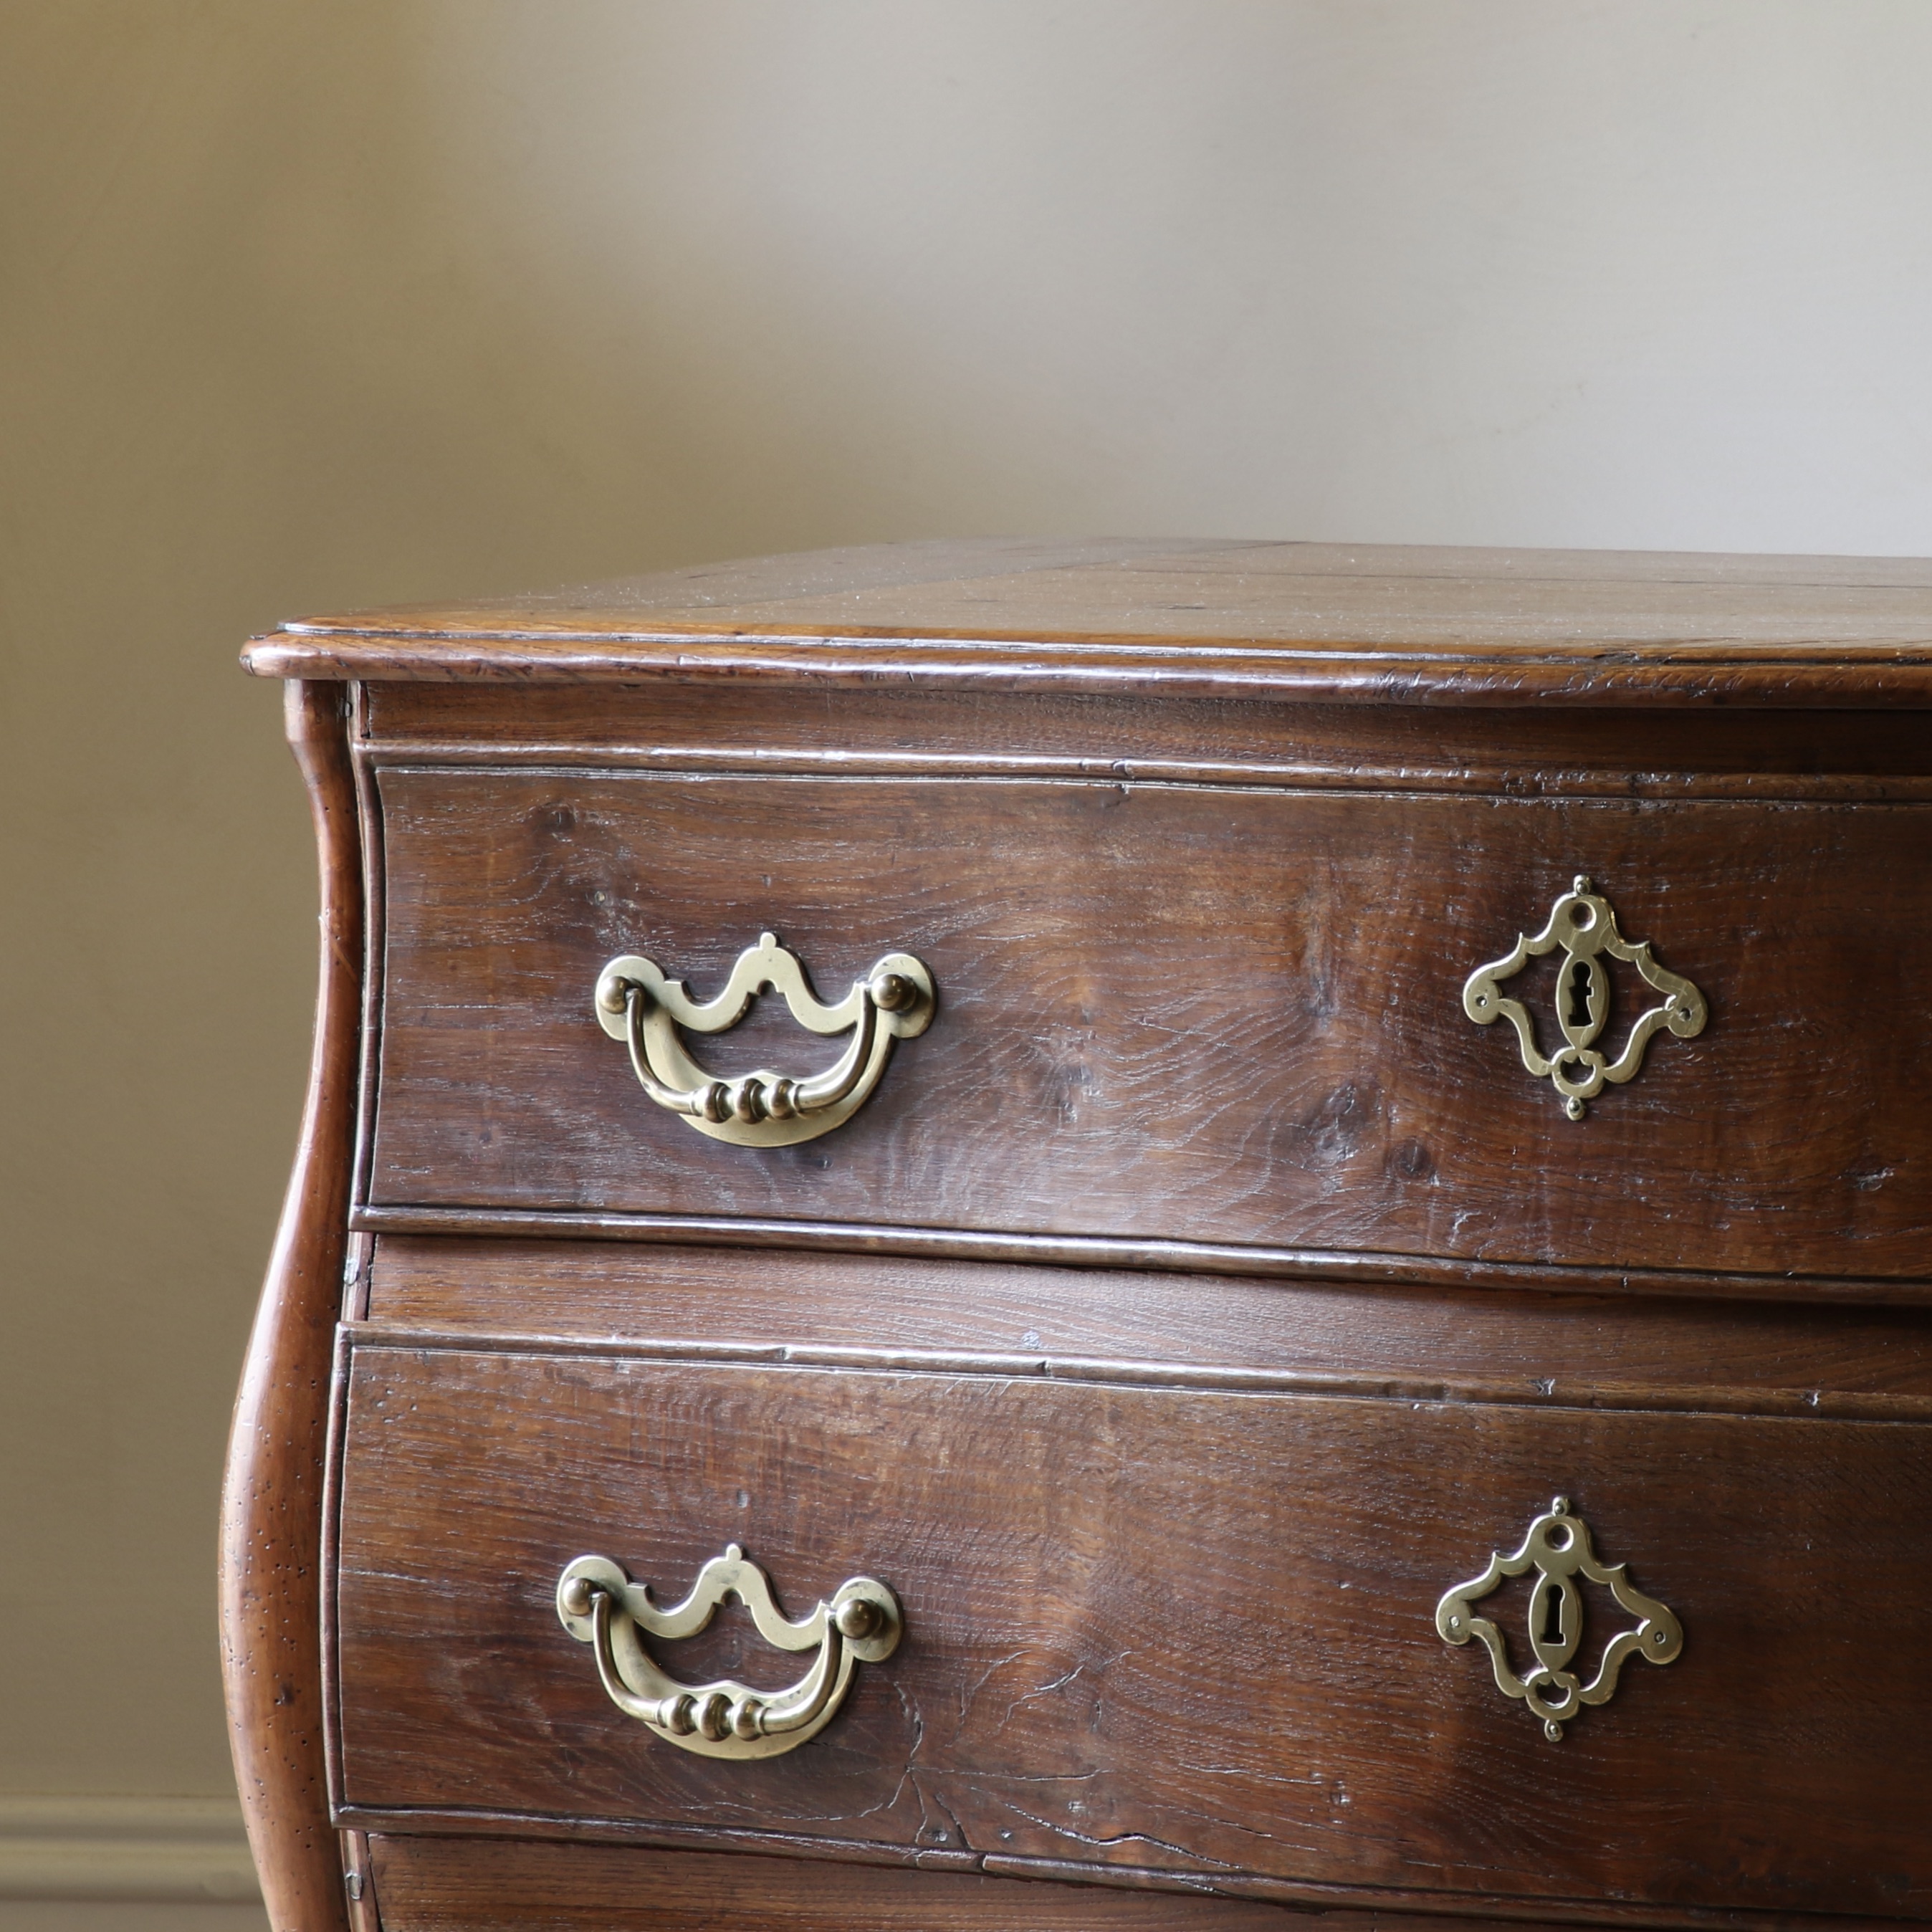 Saint Malo Bow-Fronted Commode